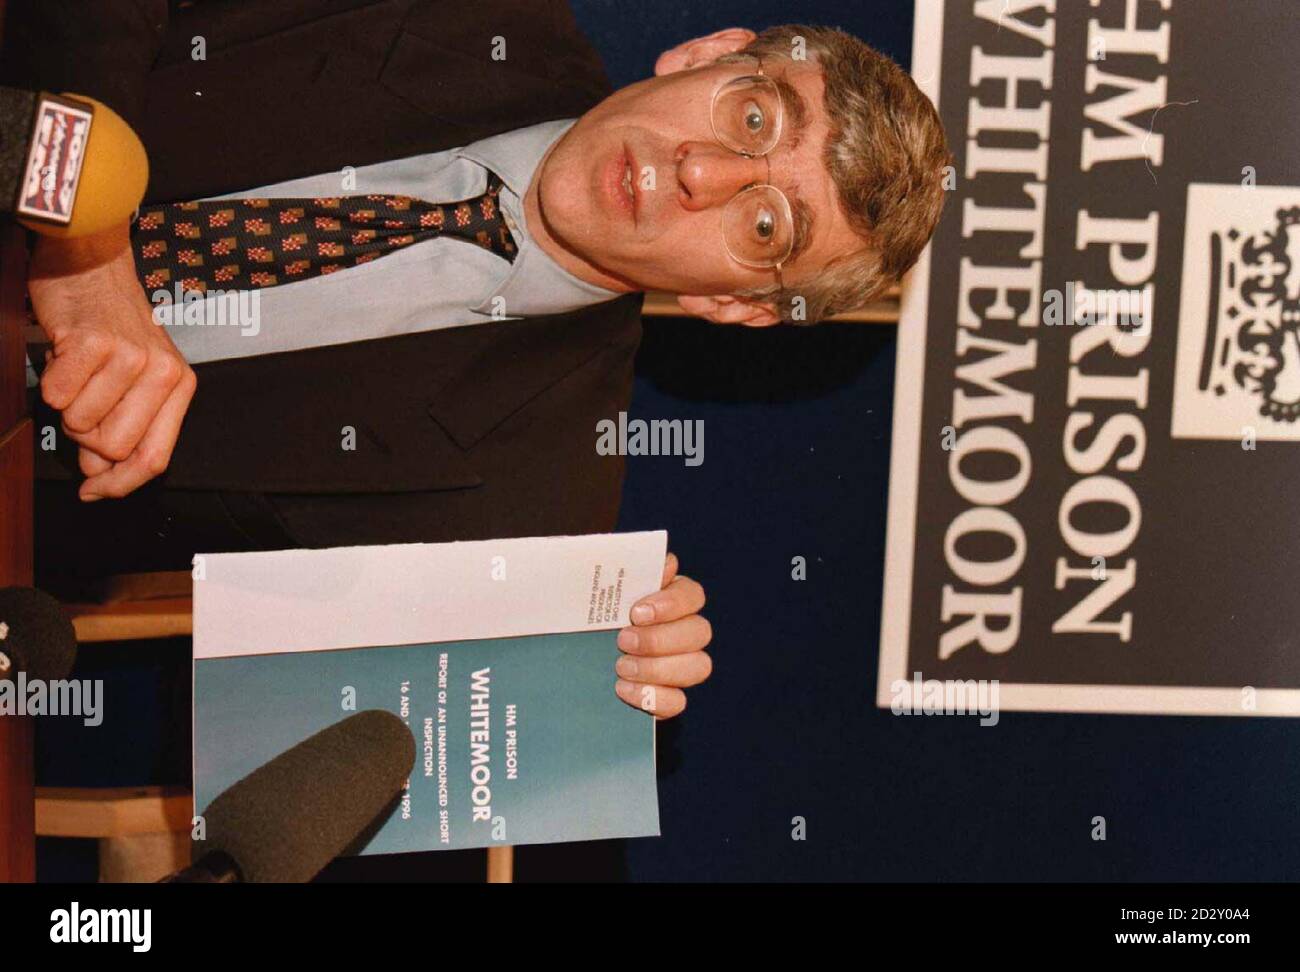 Home Secretary Jack Straw holds up a copy of the Whitemoor Prison report during a news conference following his visit to the prison in March, Cambridgeshire today (Friday). Photo by Findlay Kember/PA. Stock Photo